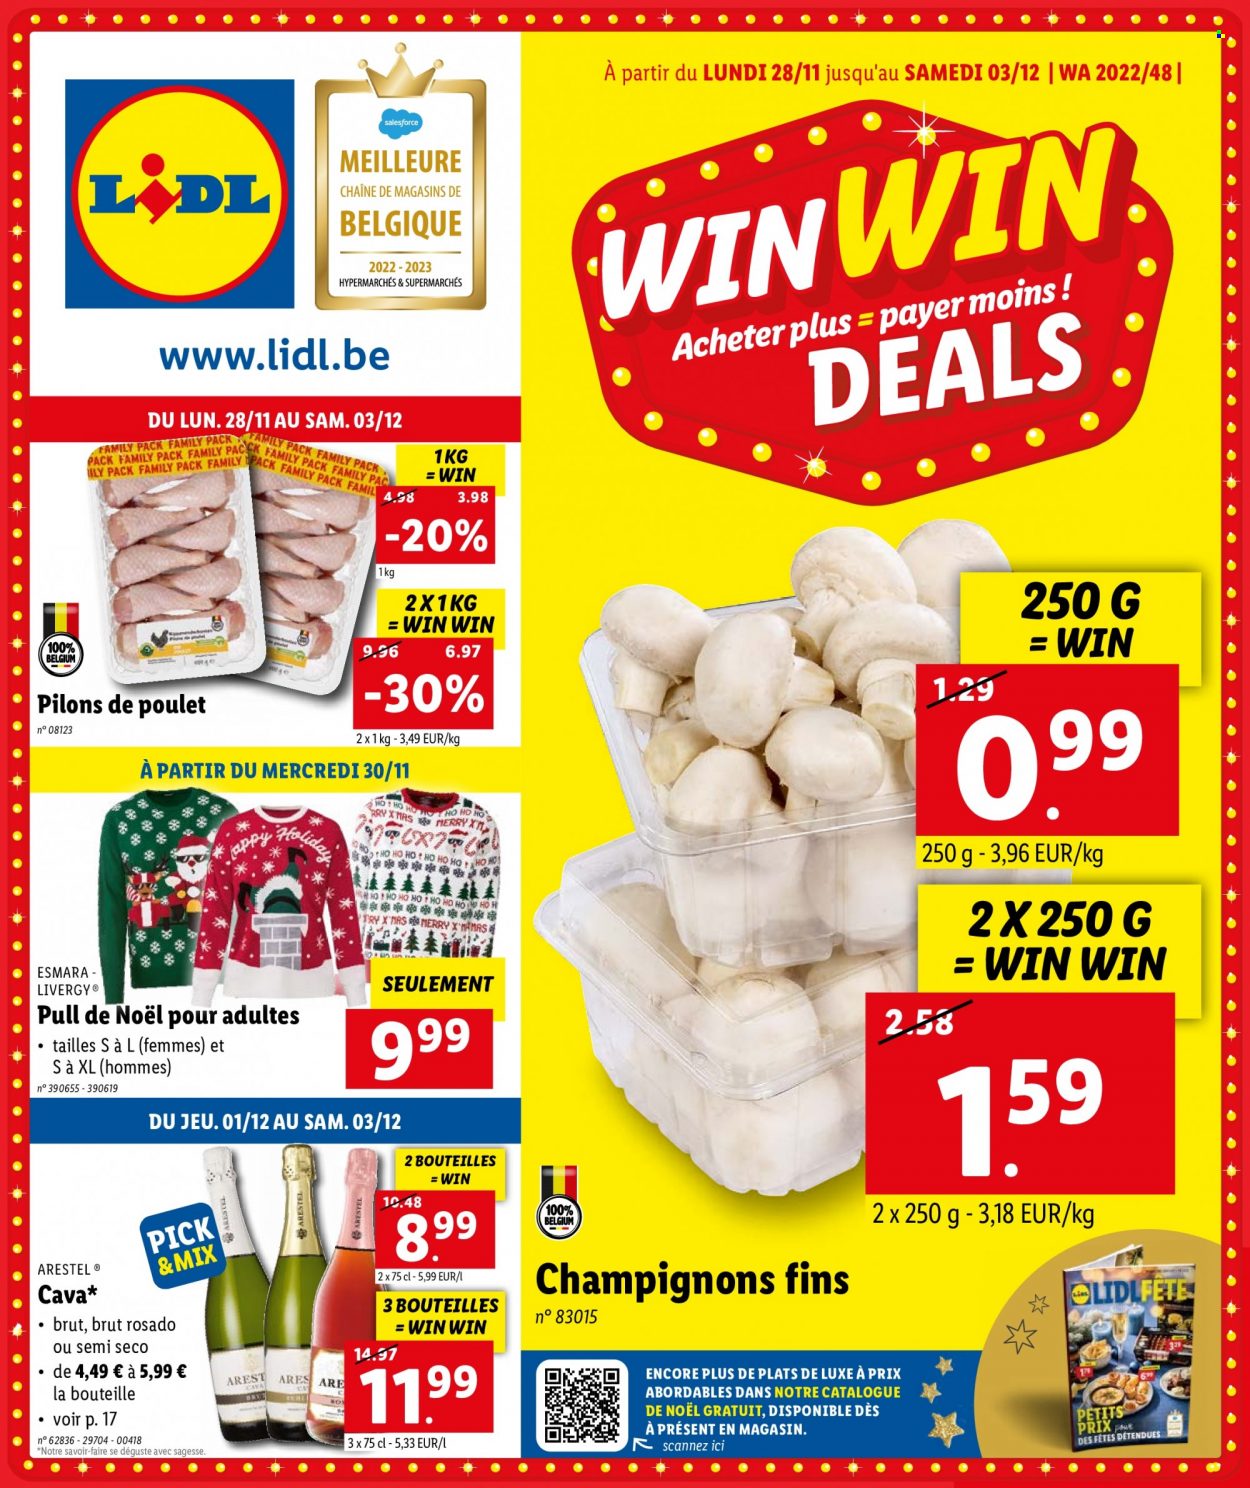 Catalogue Lidl - 28.11.2022 - 3.12.2022. Page 1.